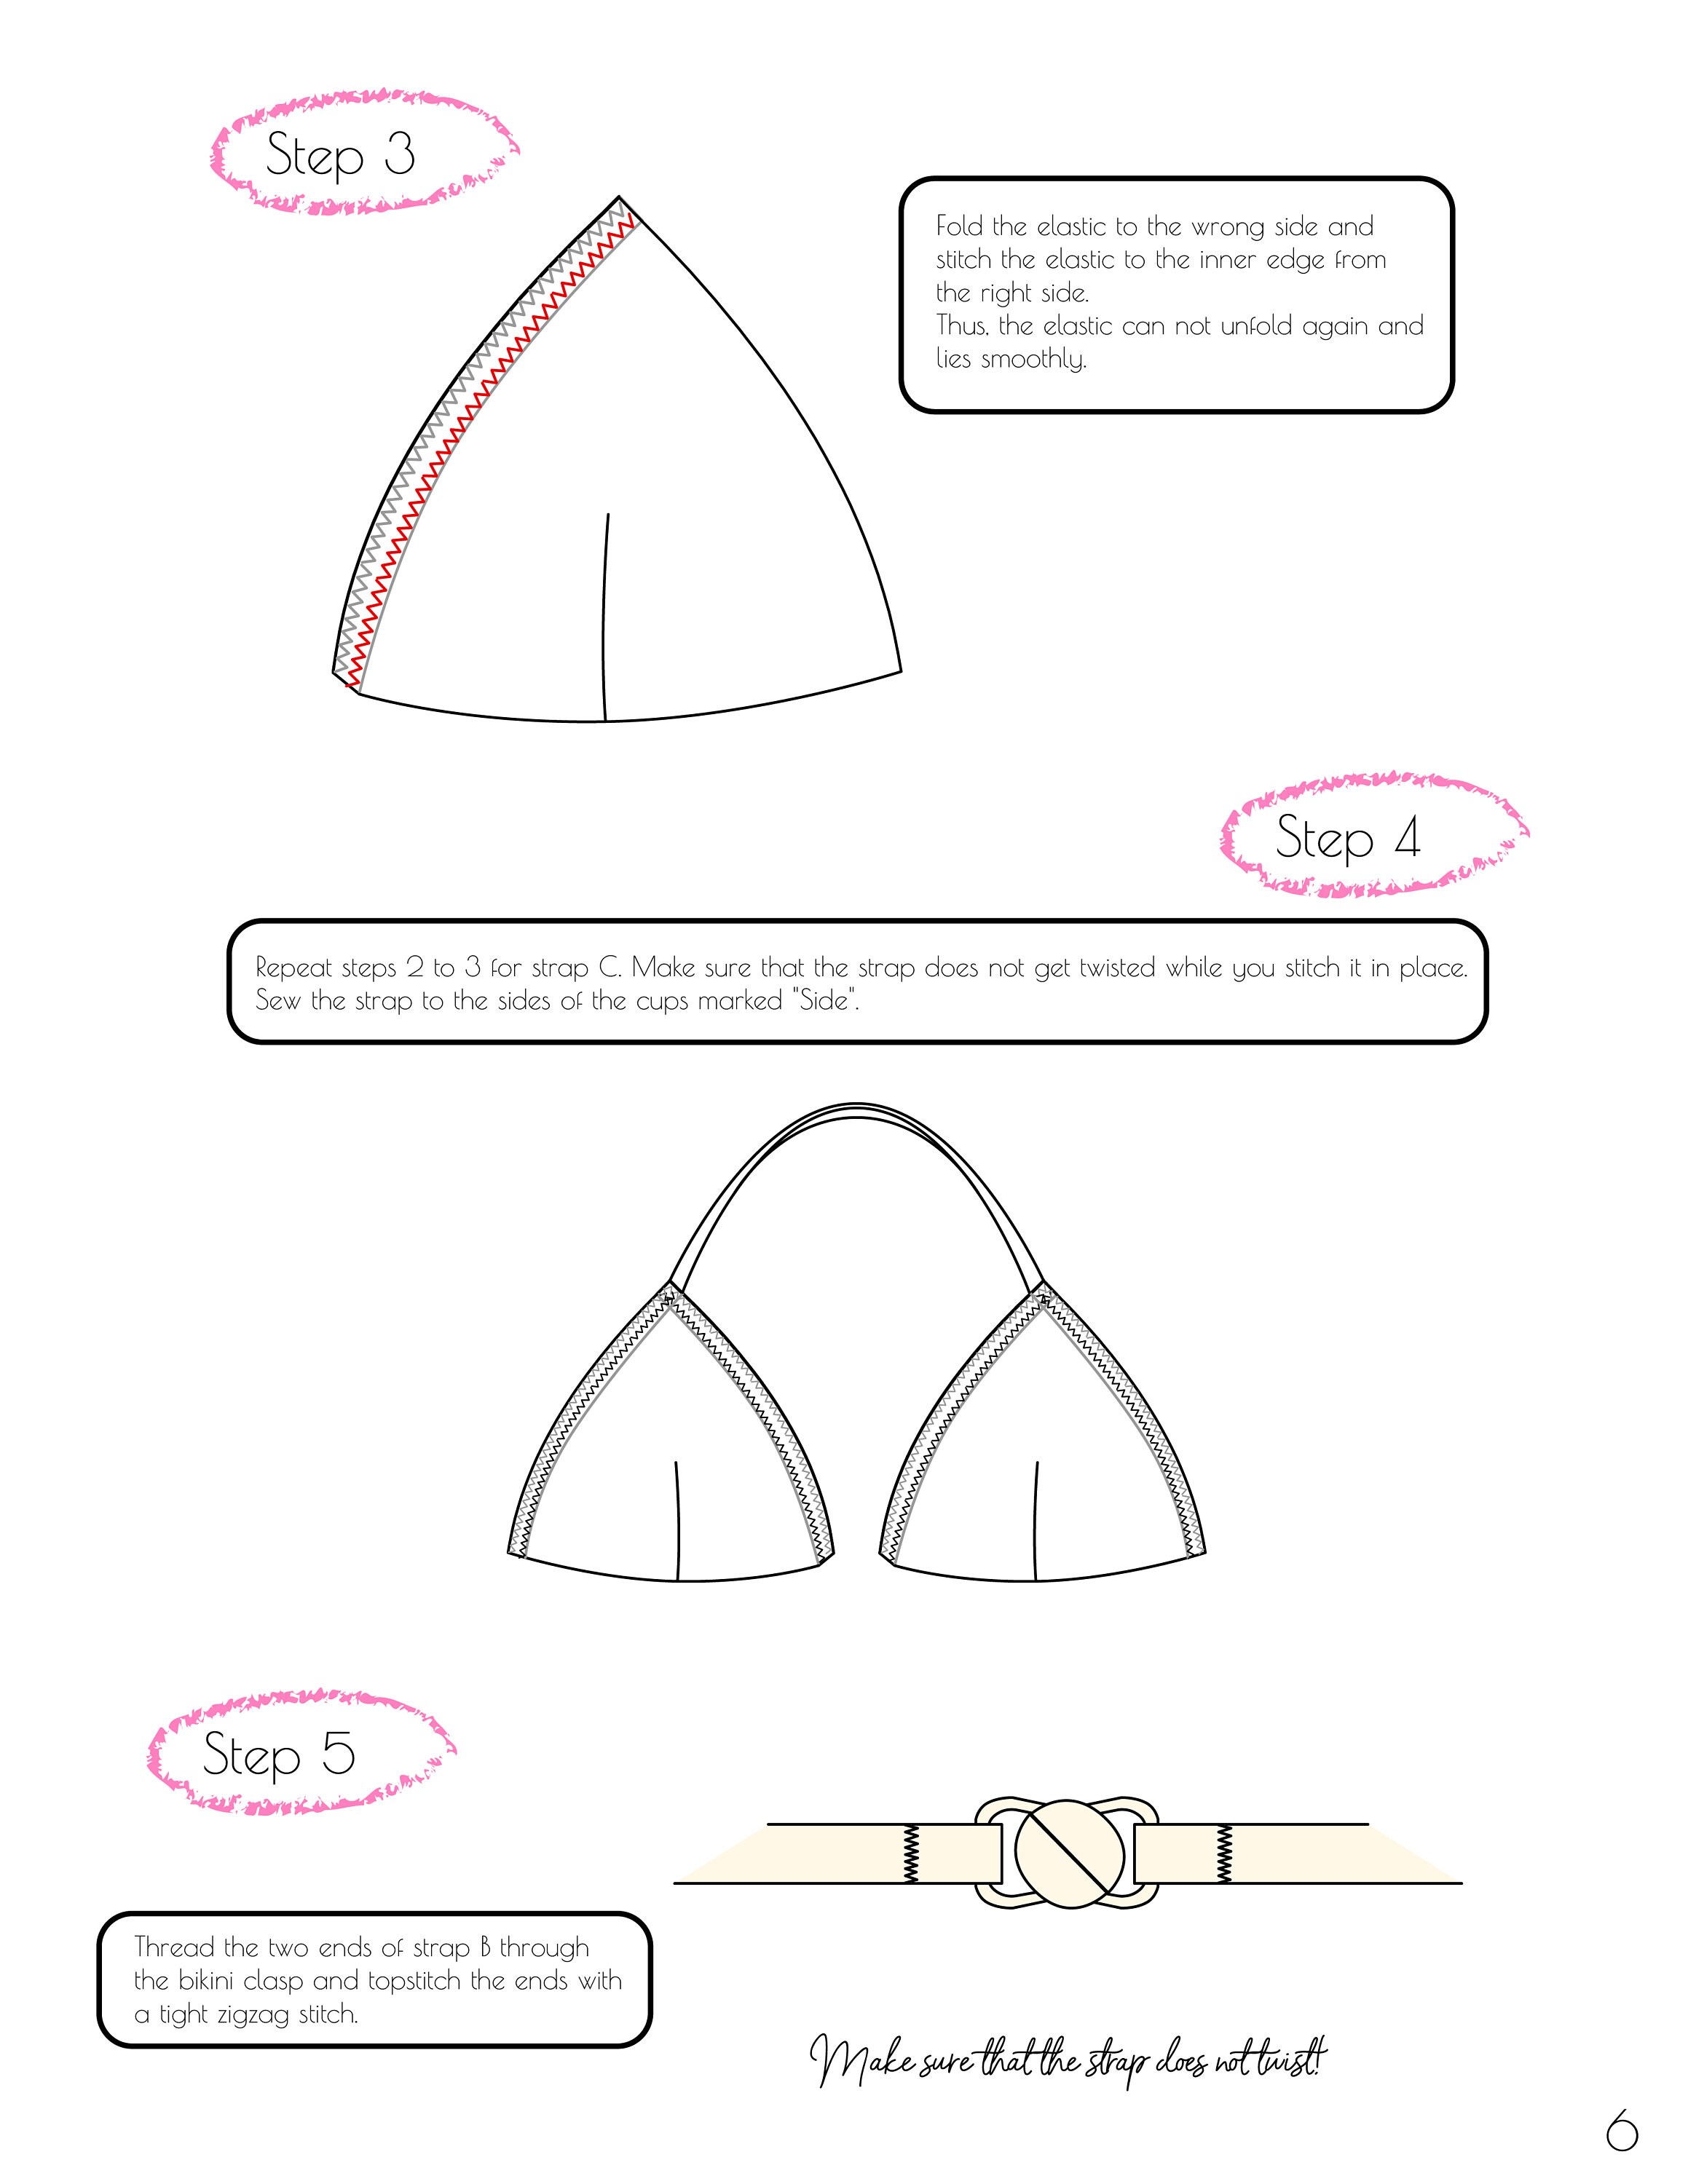 Classic Triangle Bra Burlesque Exotic Dance Costume Sewing Pattern